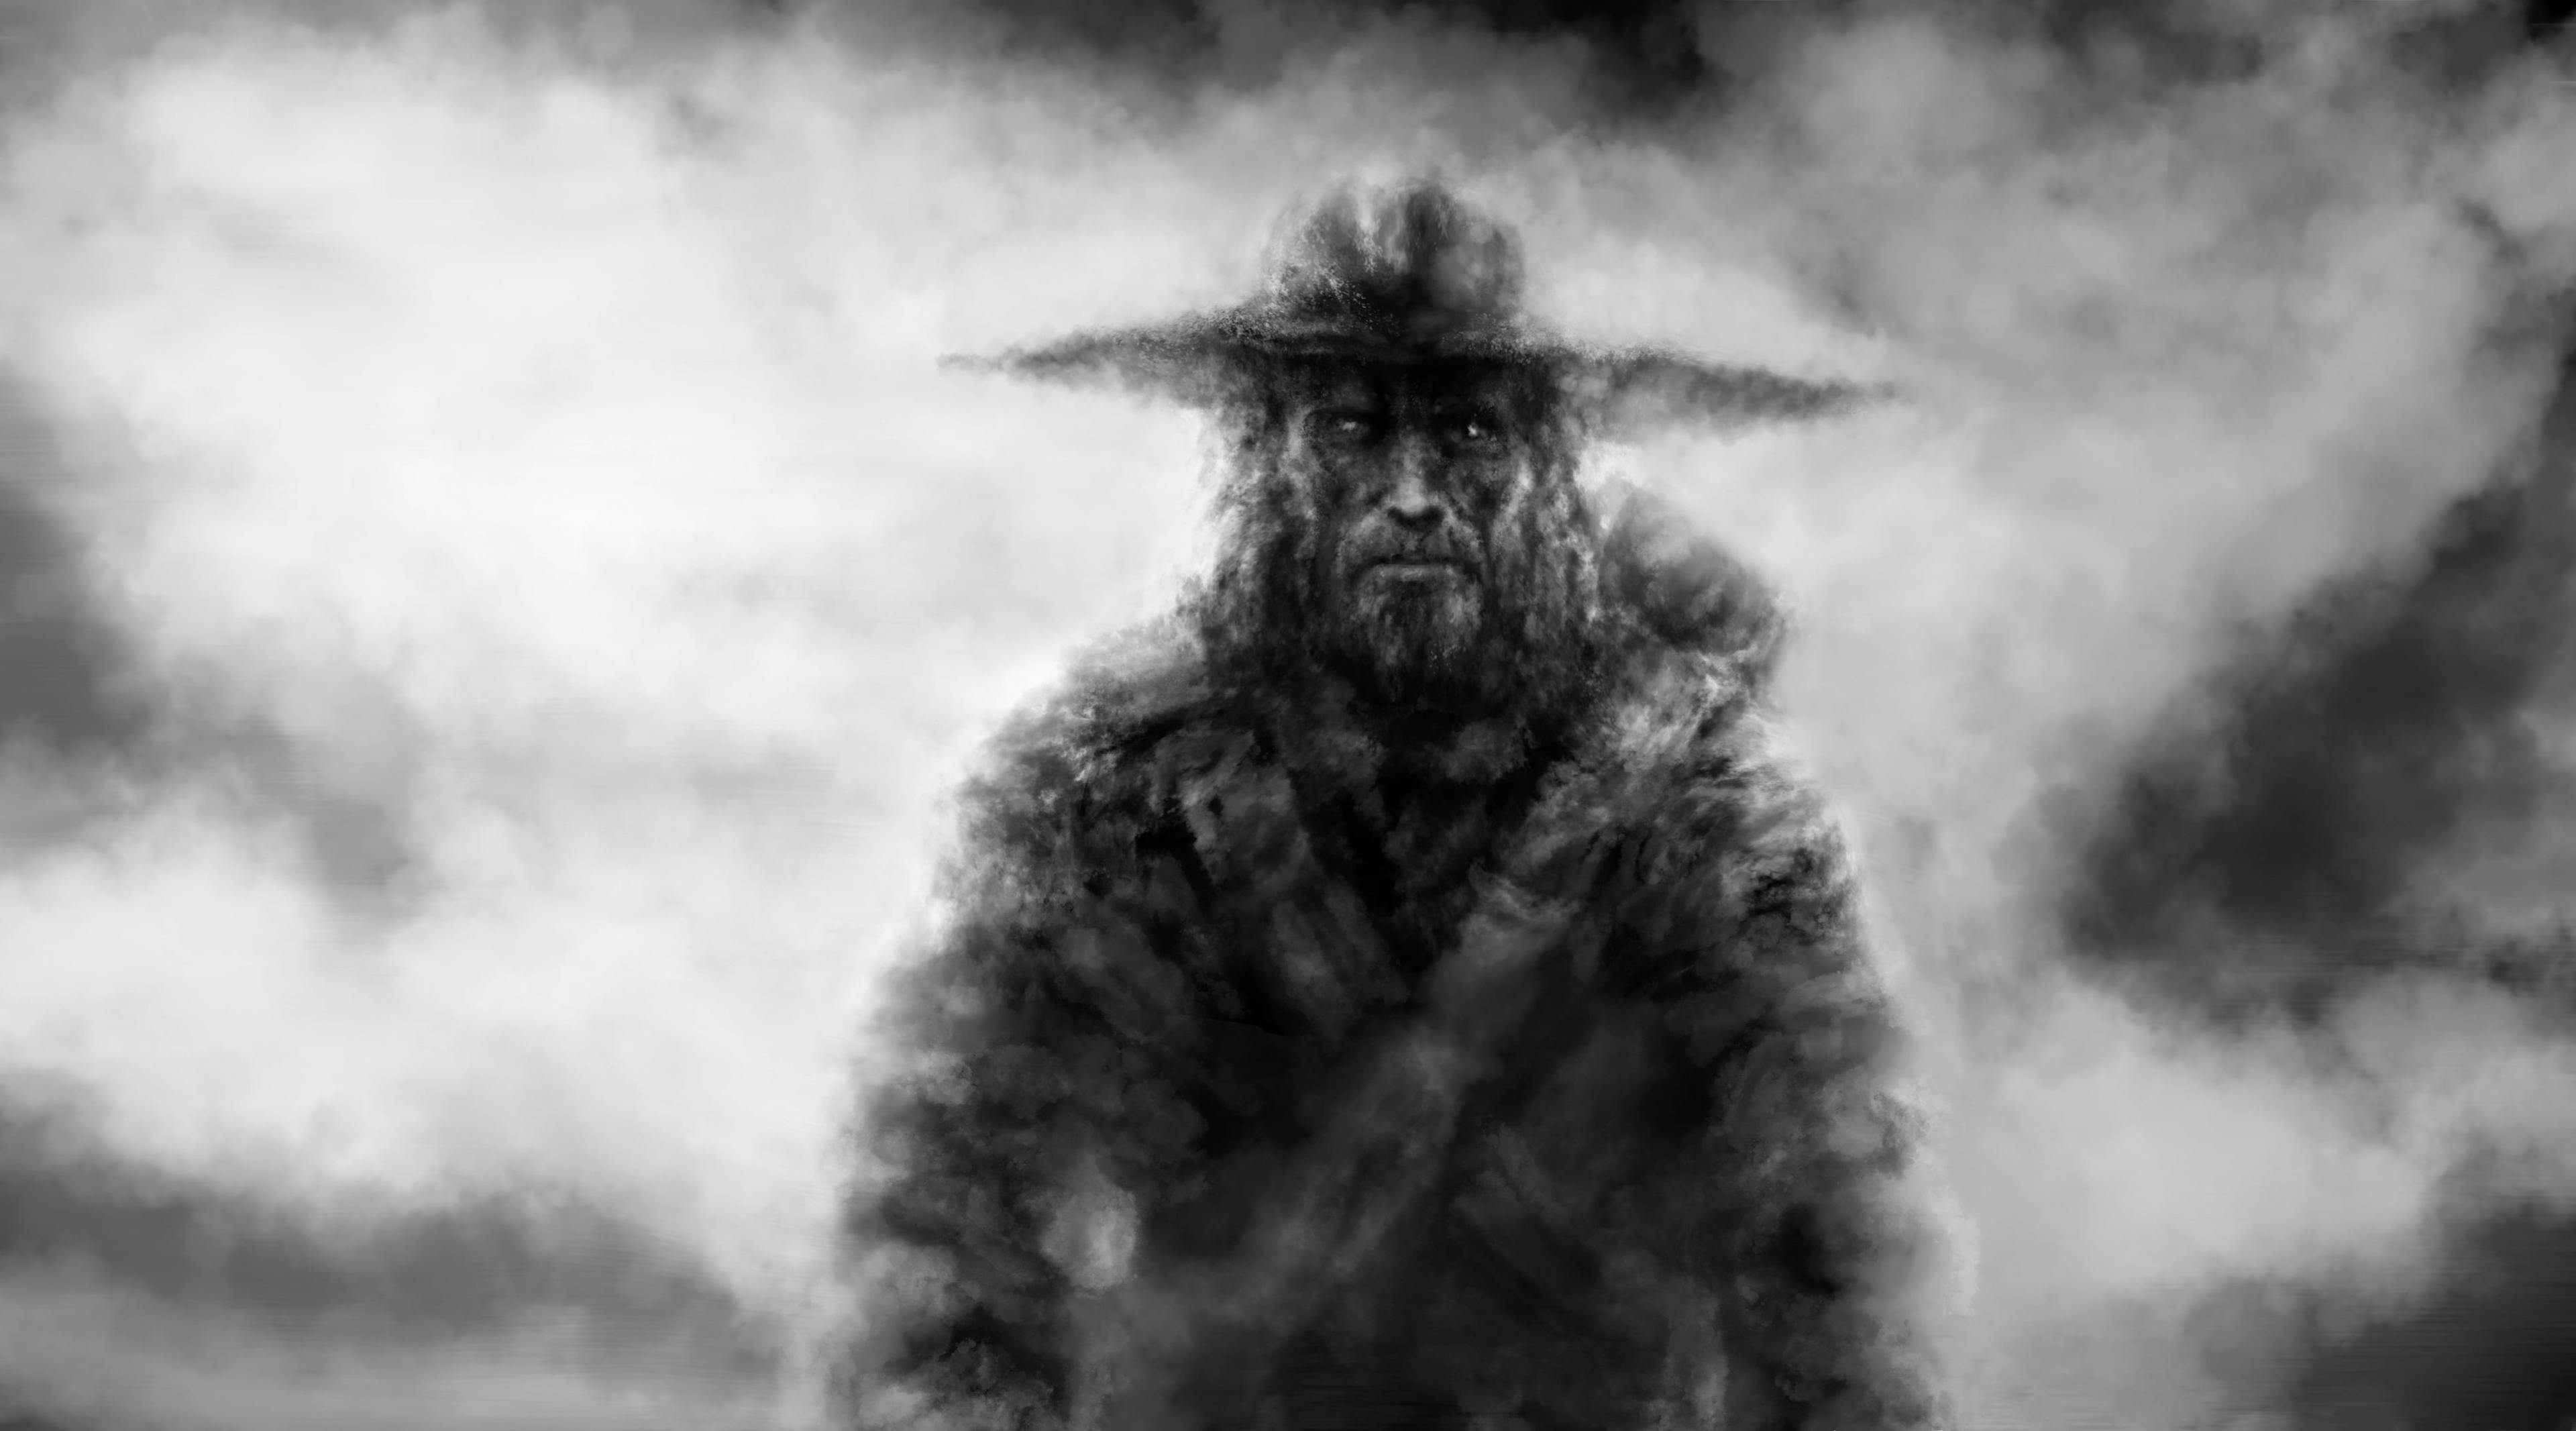 Cowboys vs. Zombies, Sidewinder Recoiled (d20 Modern)